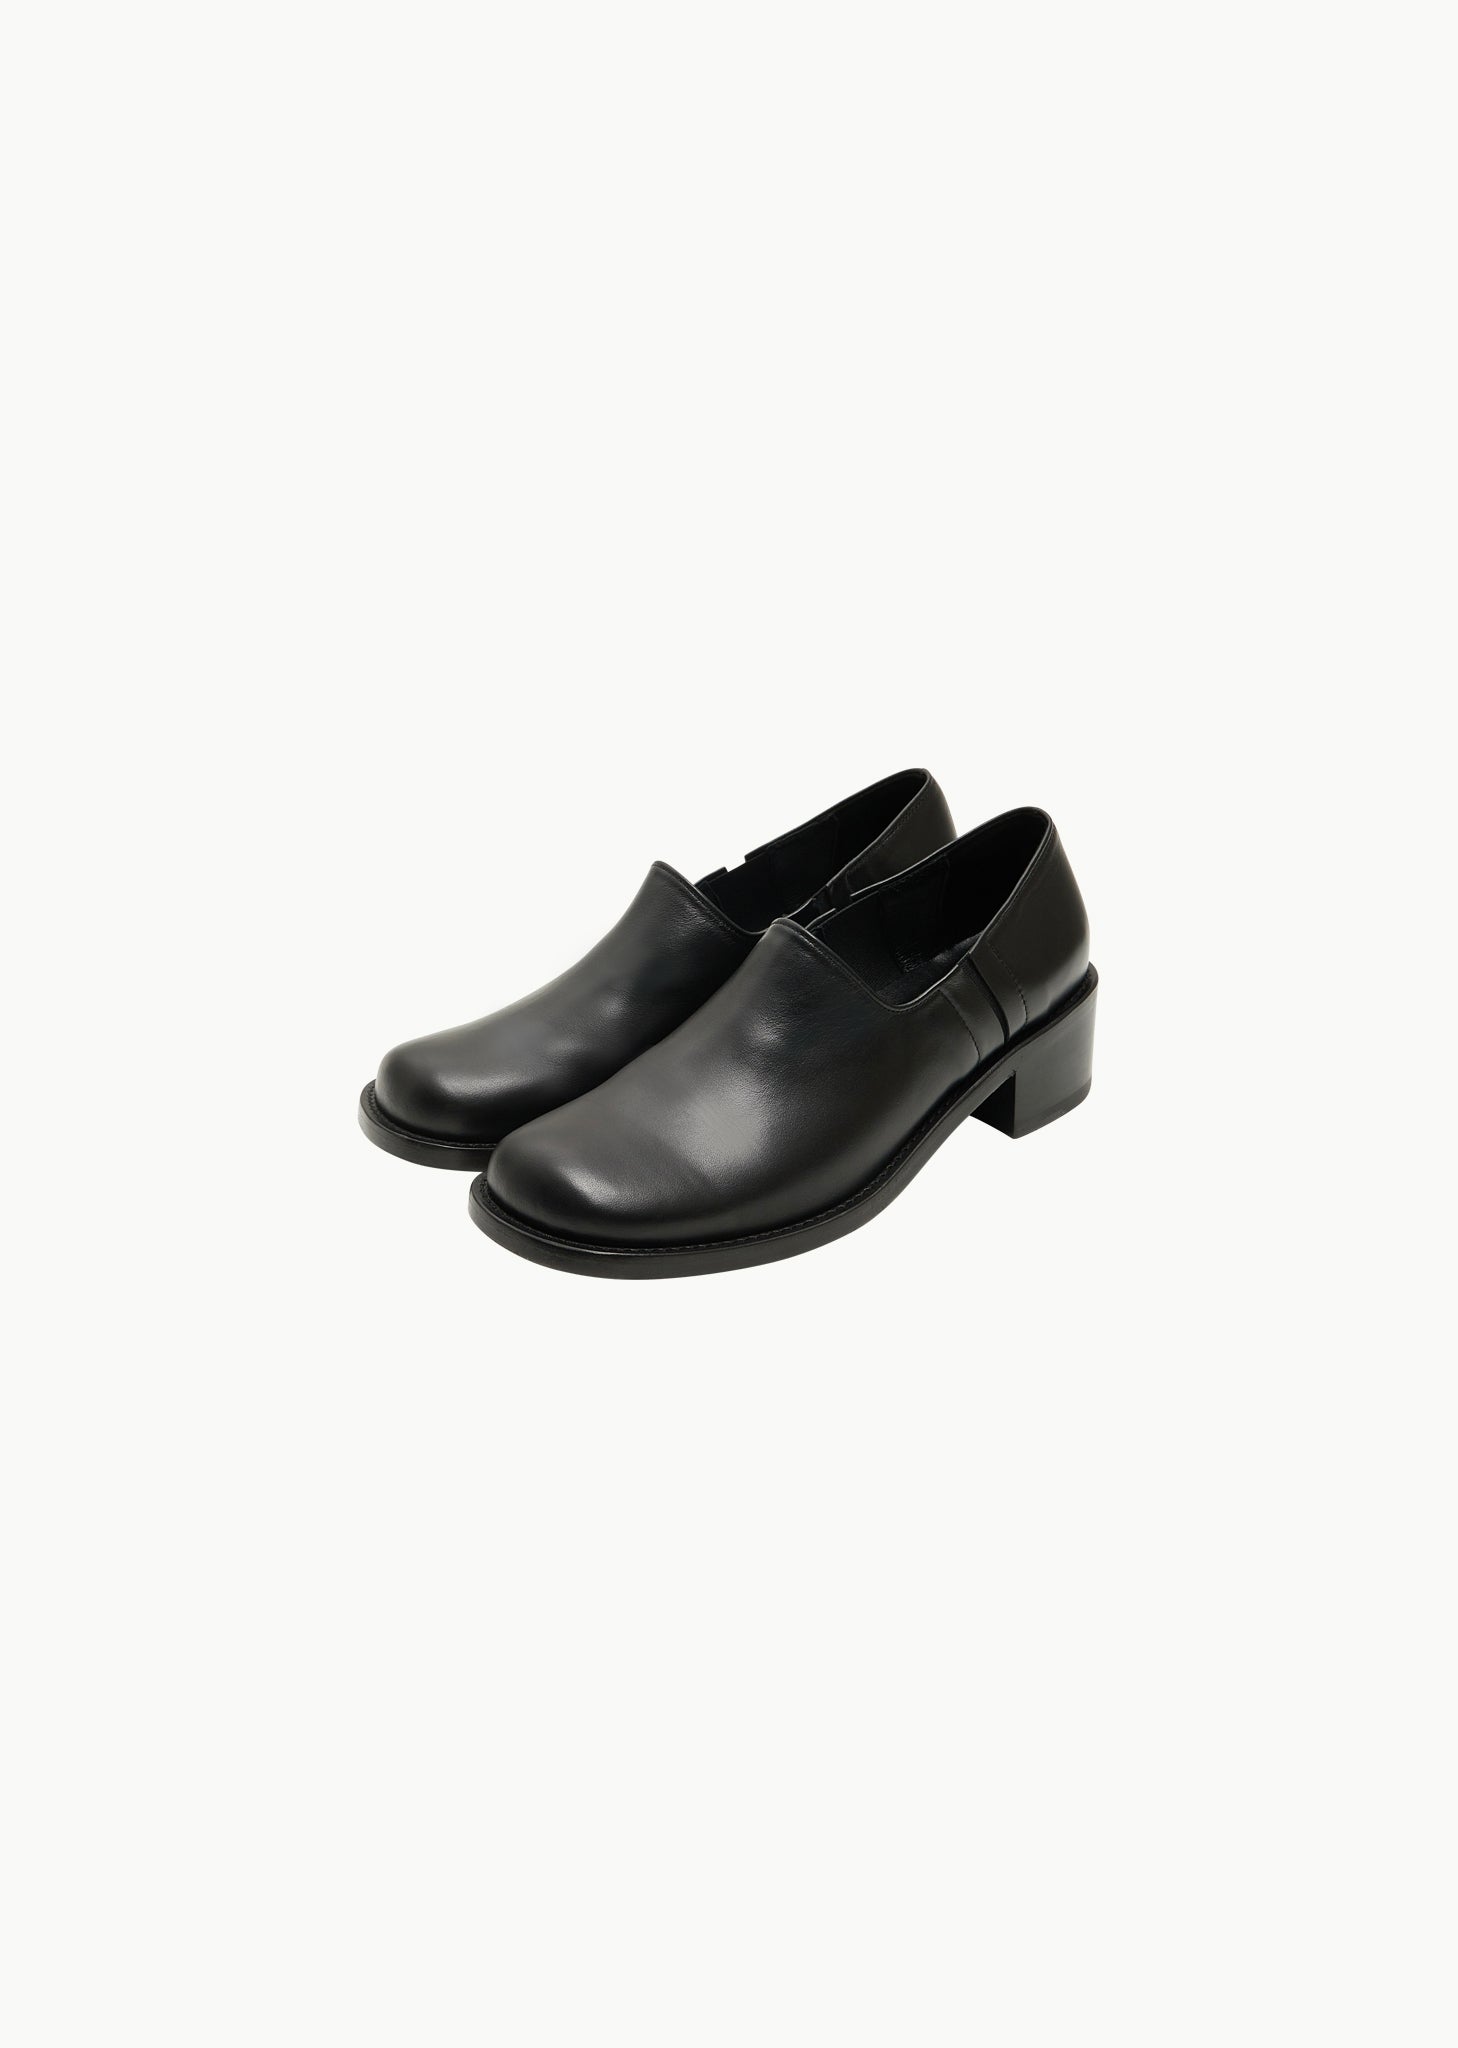 ROUNDED LOAFER